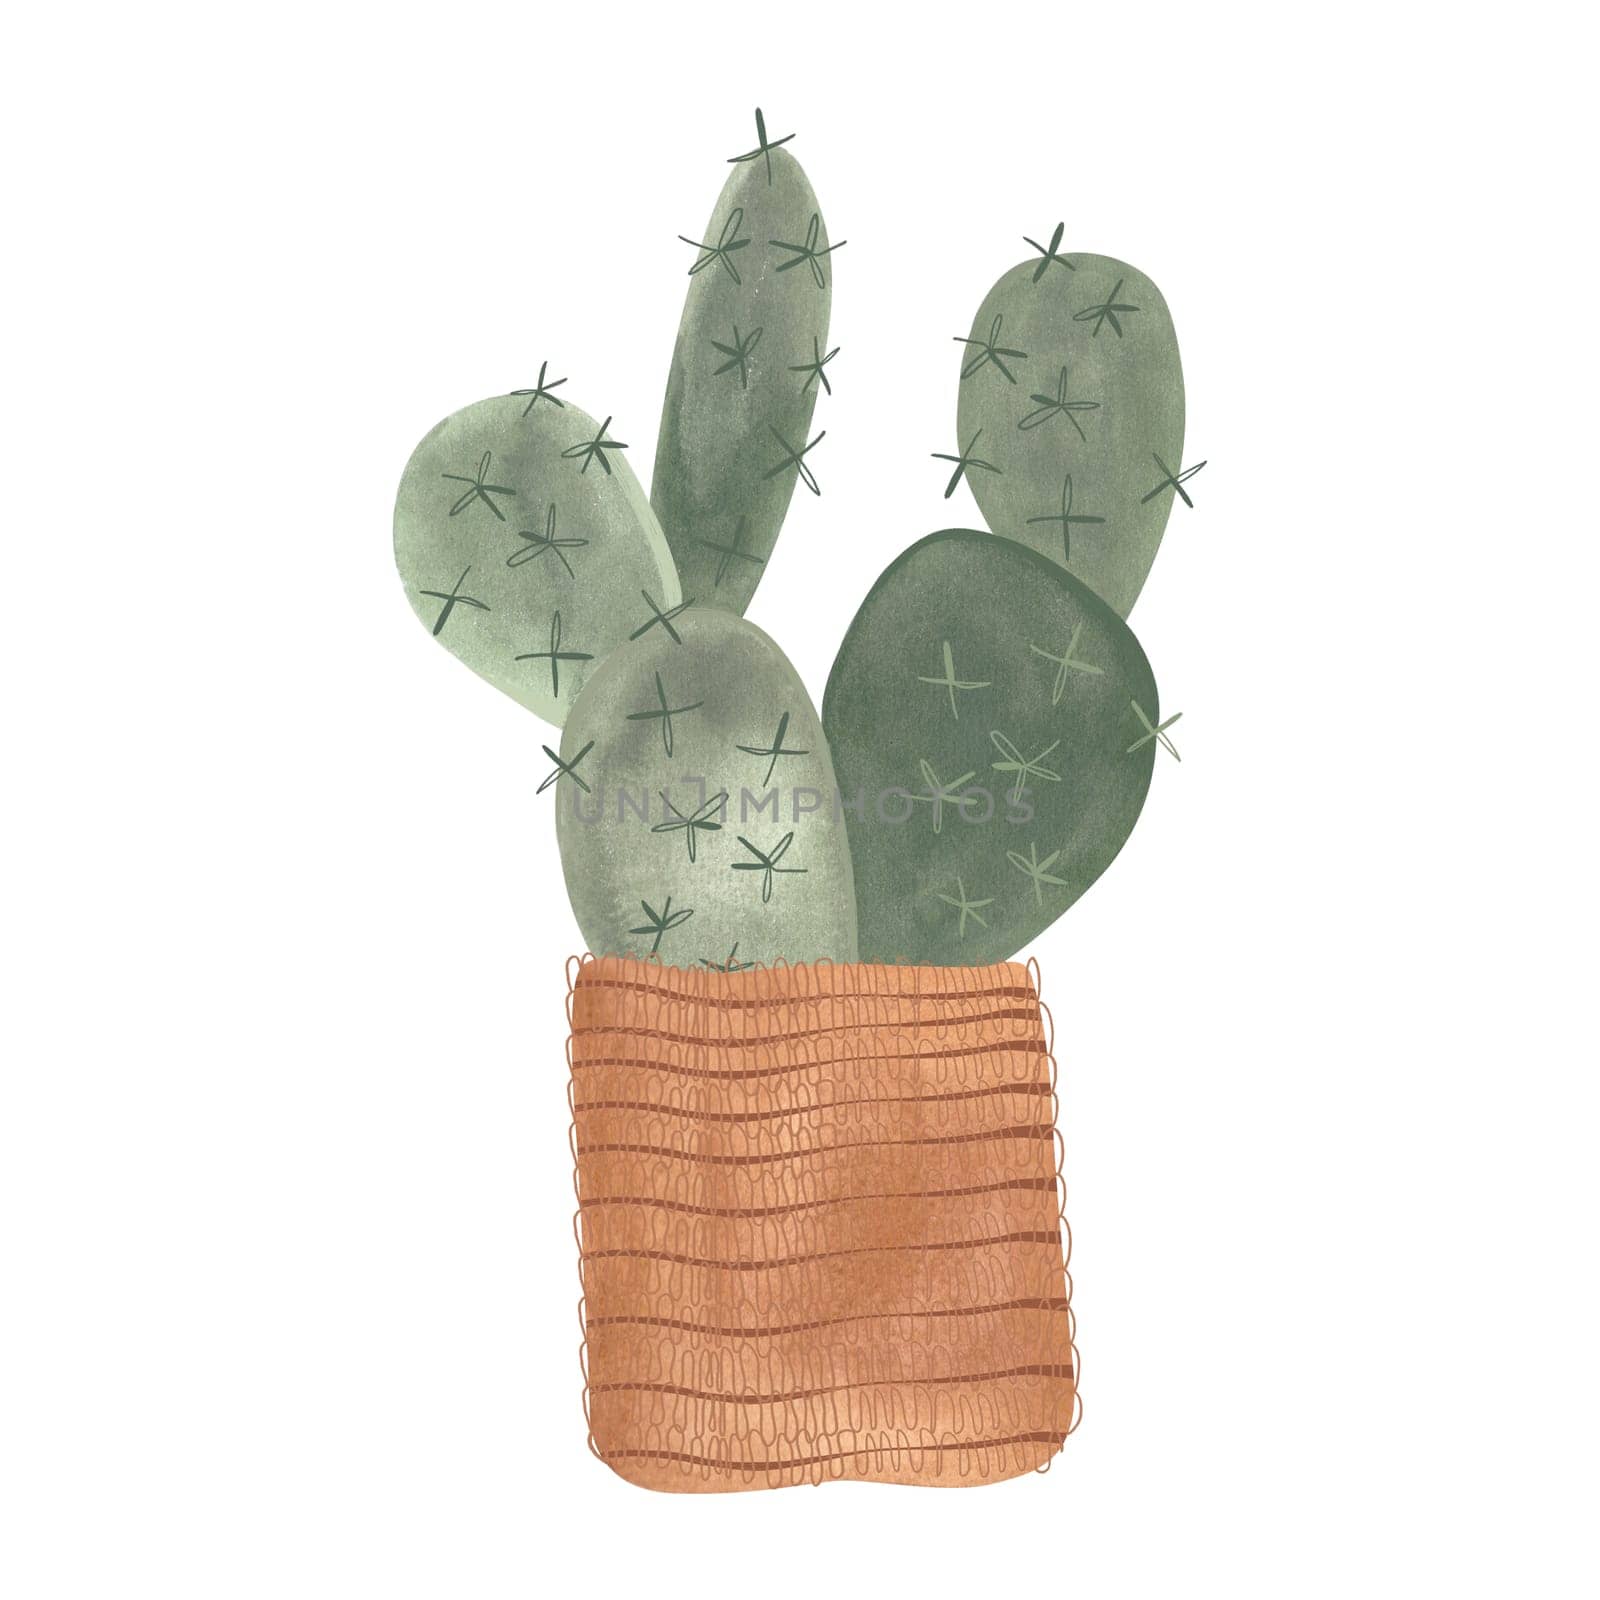 Cactus in a wicker basket. Plants for the home. Floriculture. Interior decoration. Isolated watercolor illustration on white background. Clipart